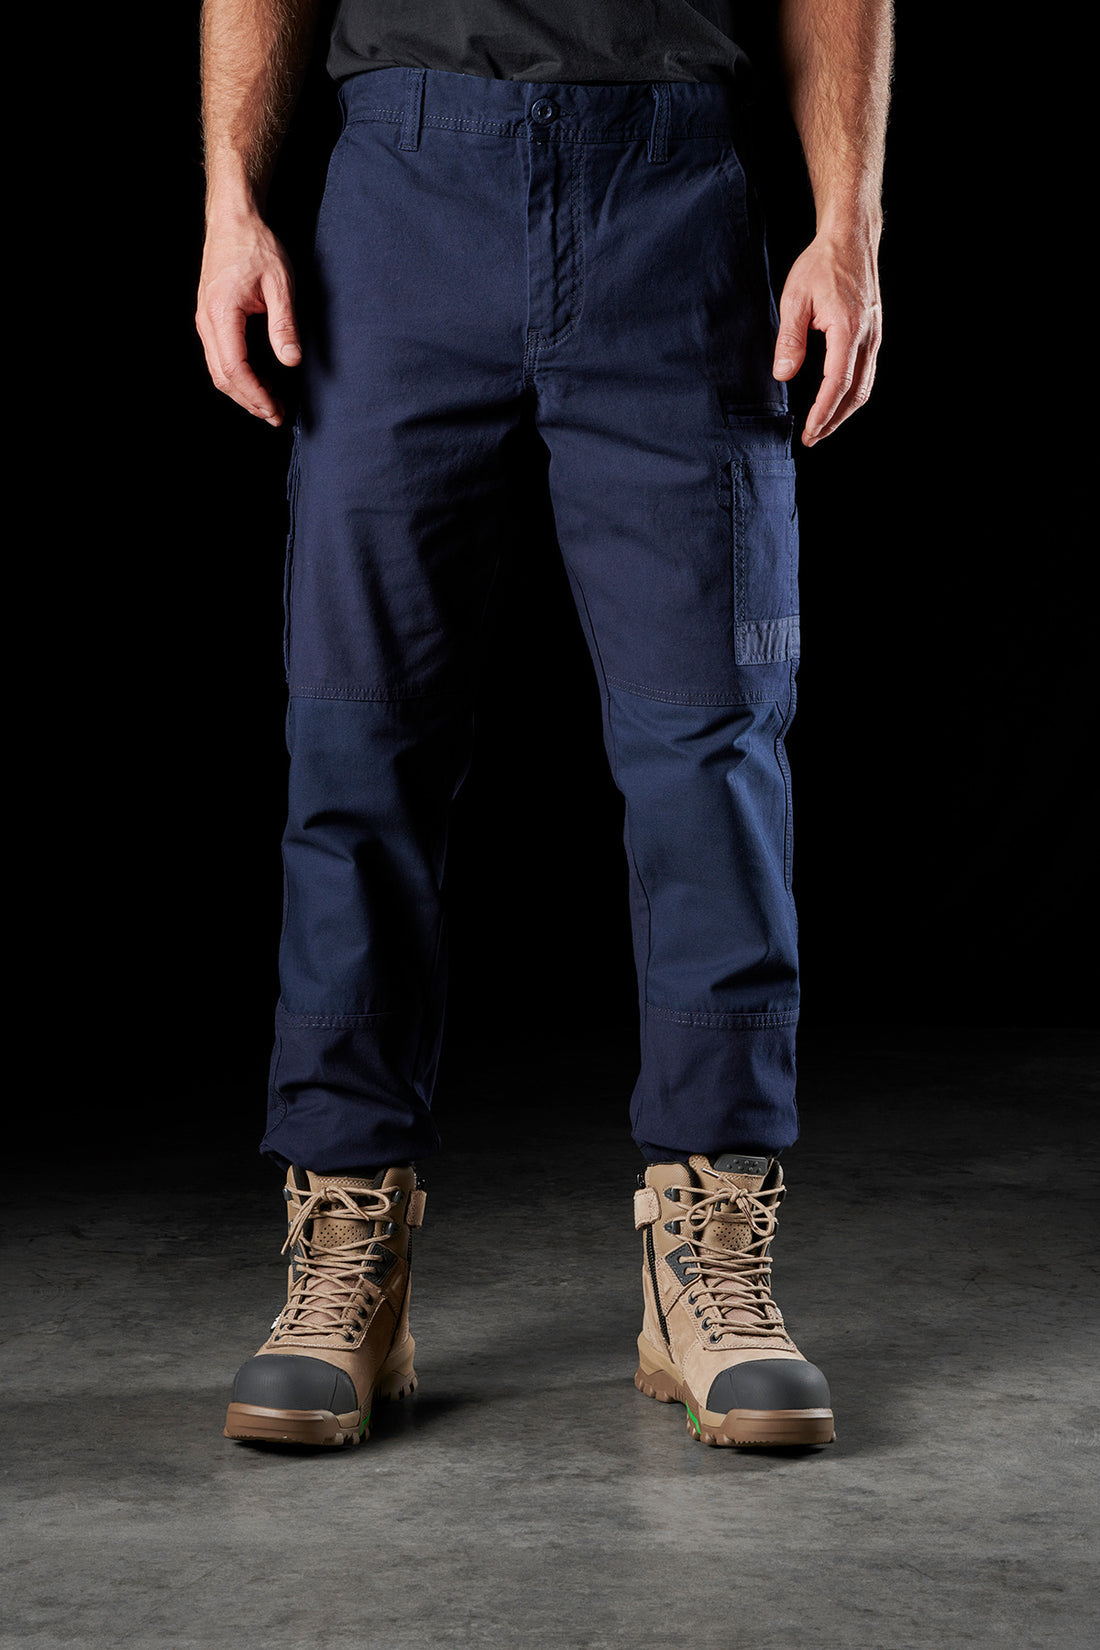 FXD WP3 STRETCH WORK PANTS NAVY